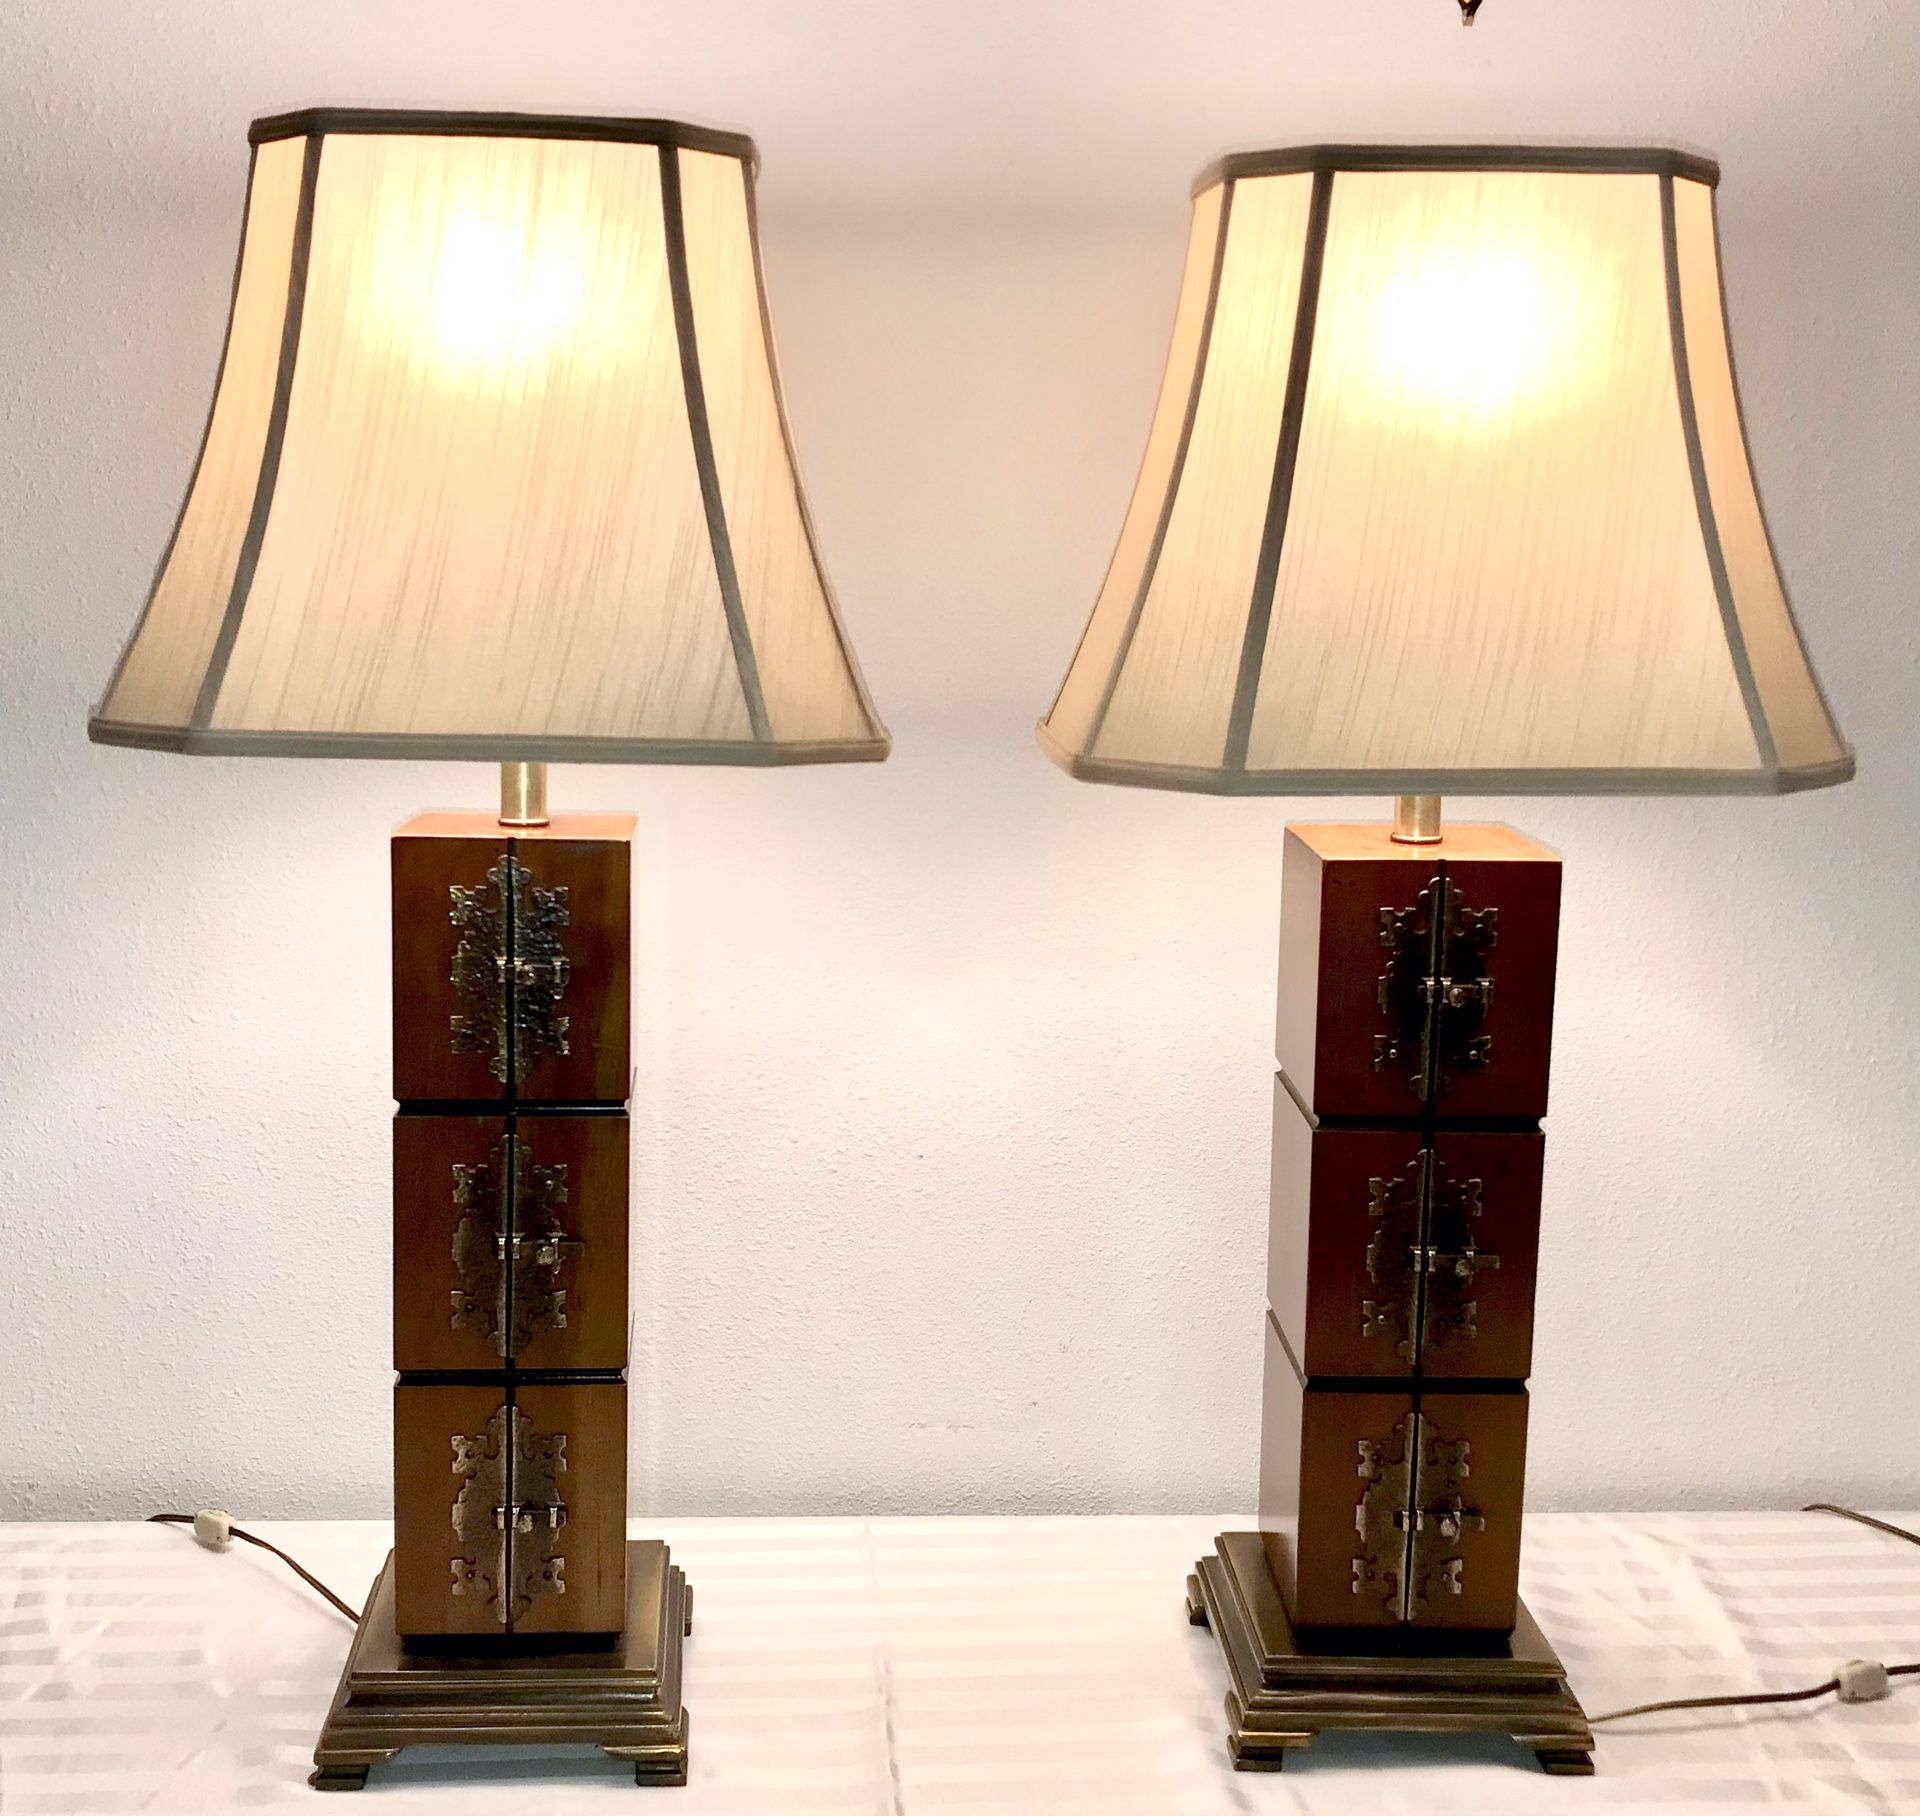 Vintage Brass And Wood Table Lamps